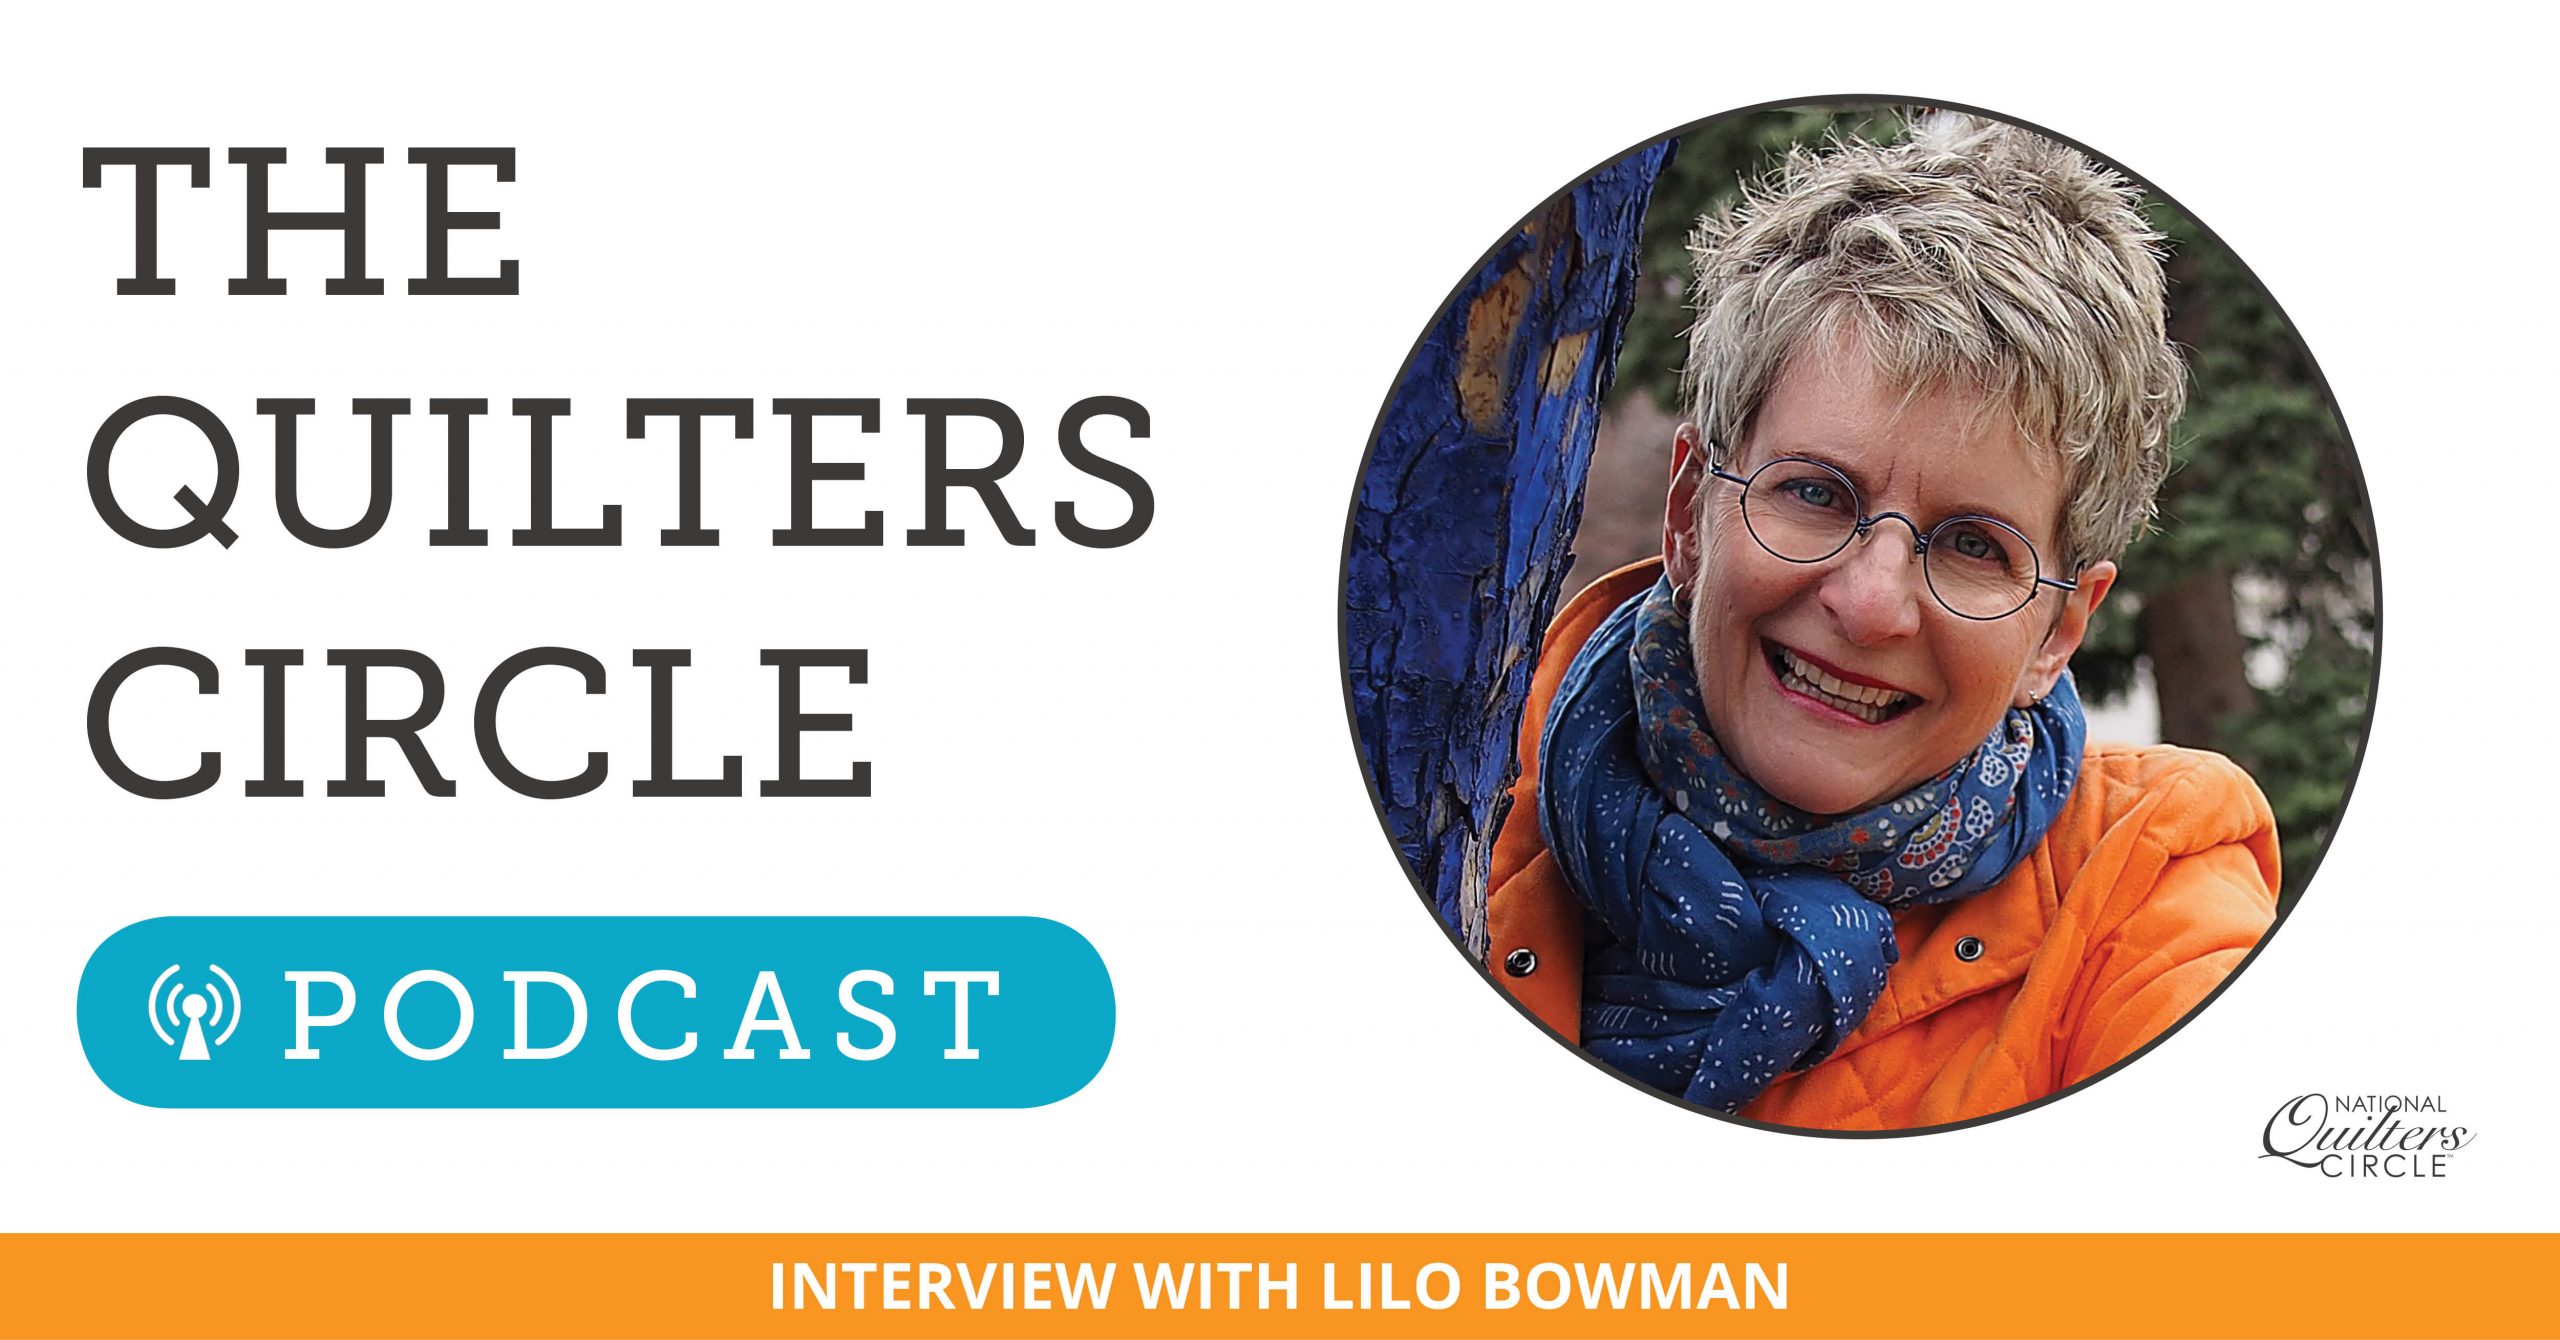 The Quilter's Circle Podcast text with a woman smiling